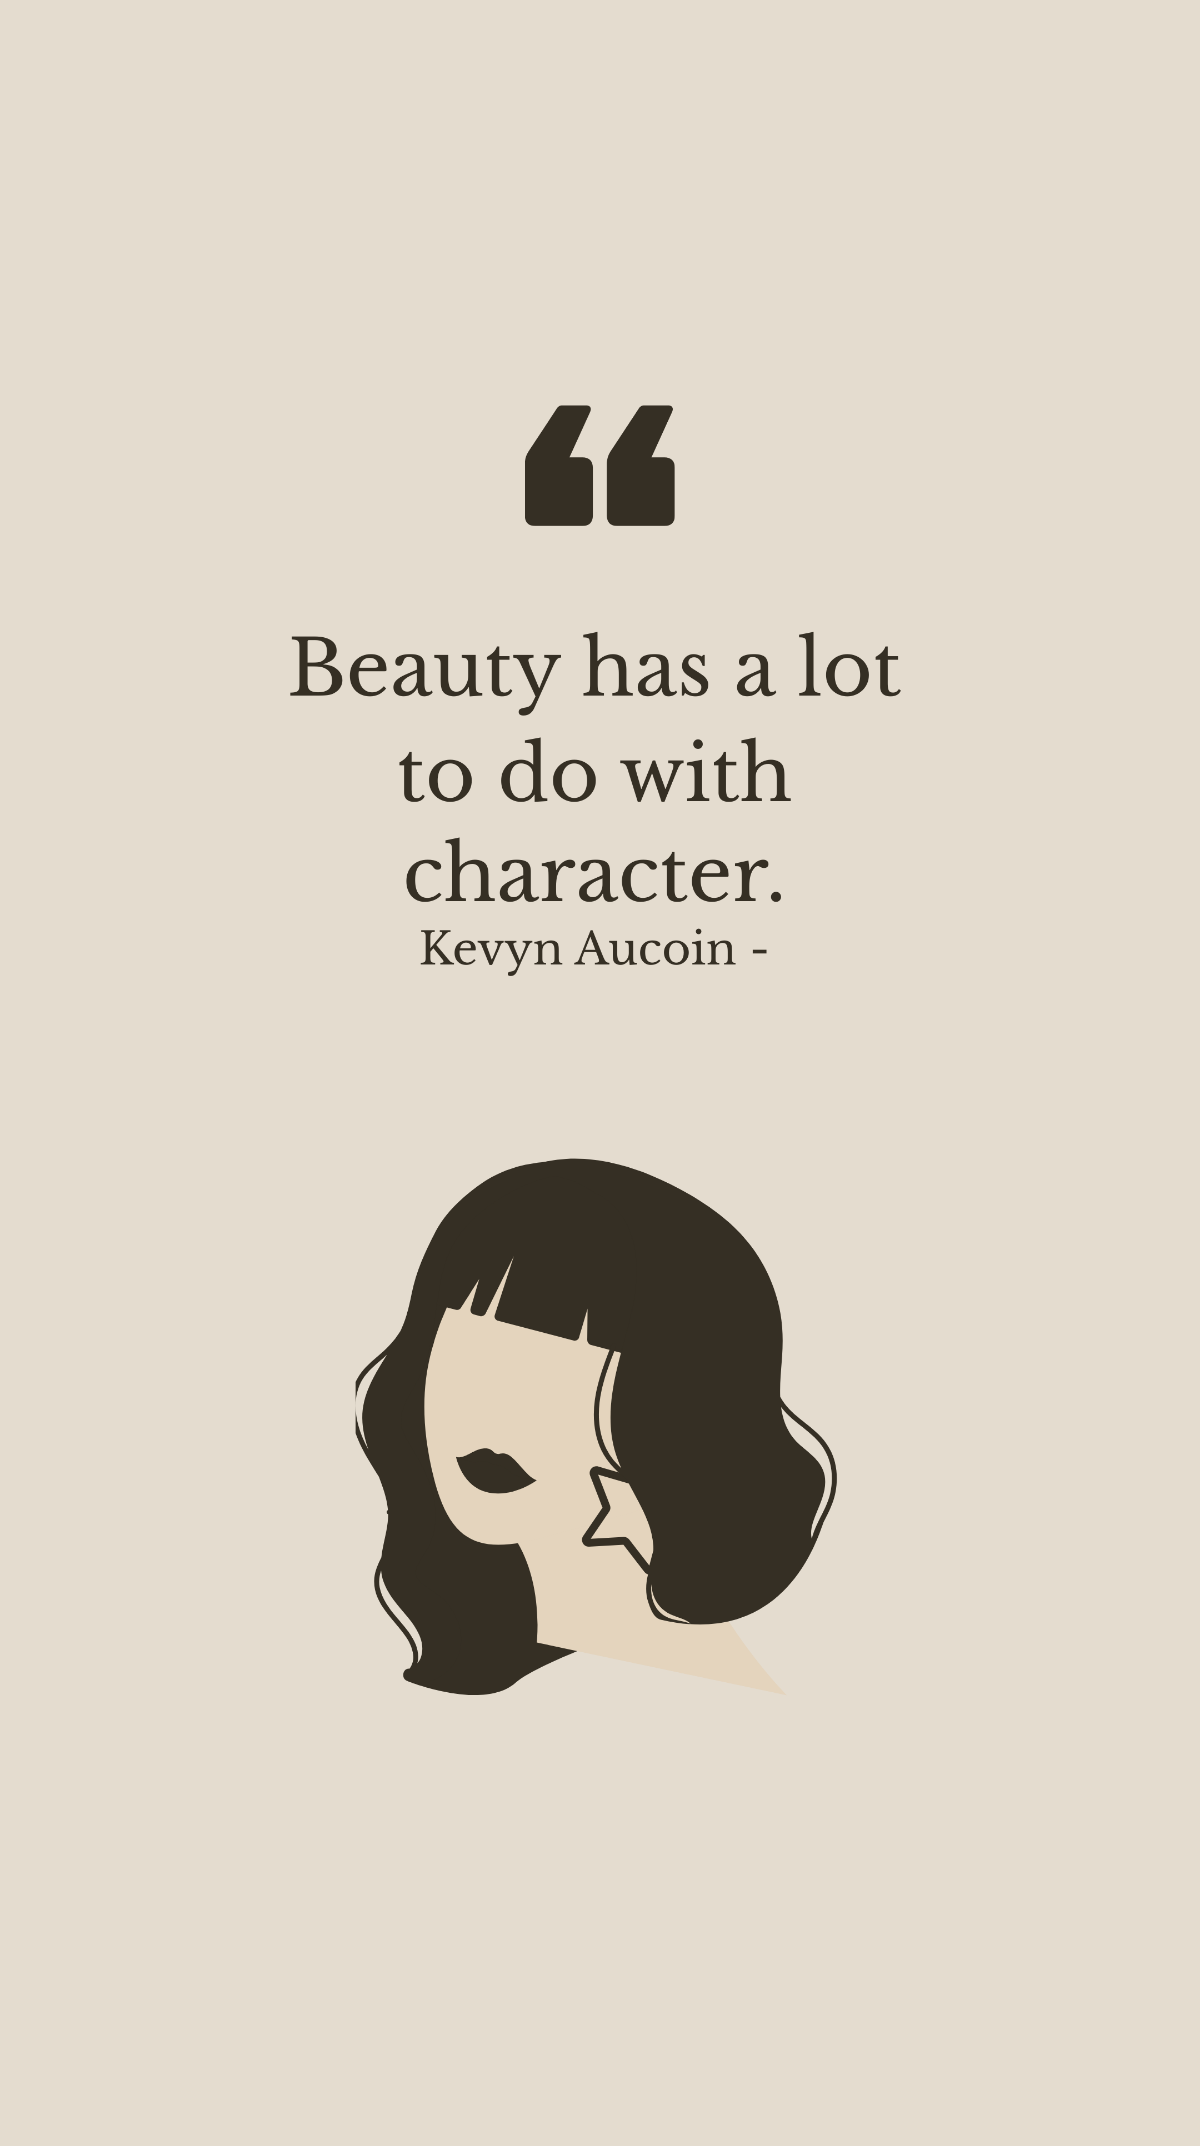 Kevyn Aucoin - Beauty has a lot to do with character. Template